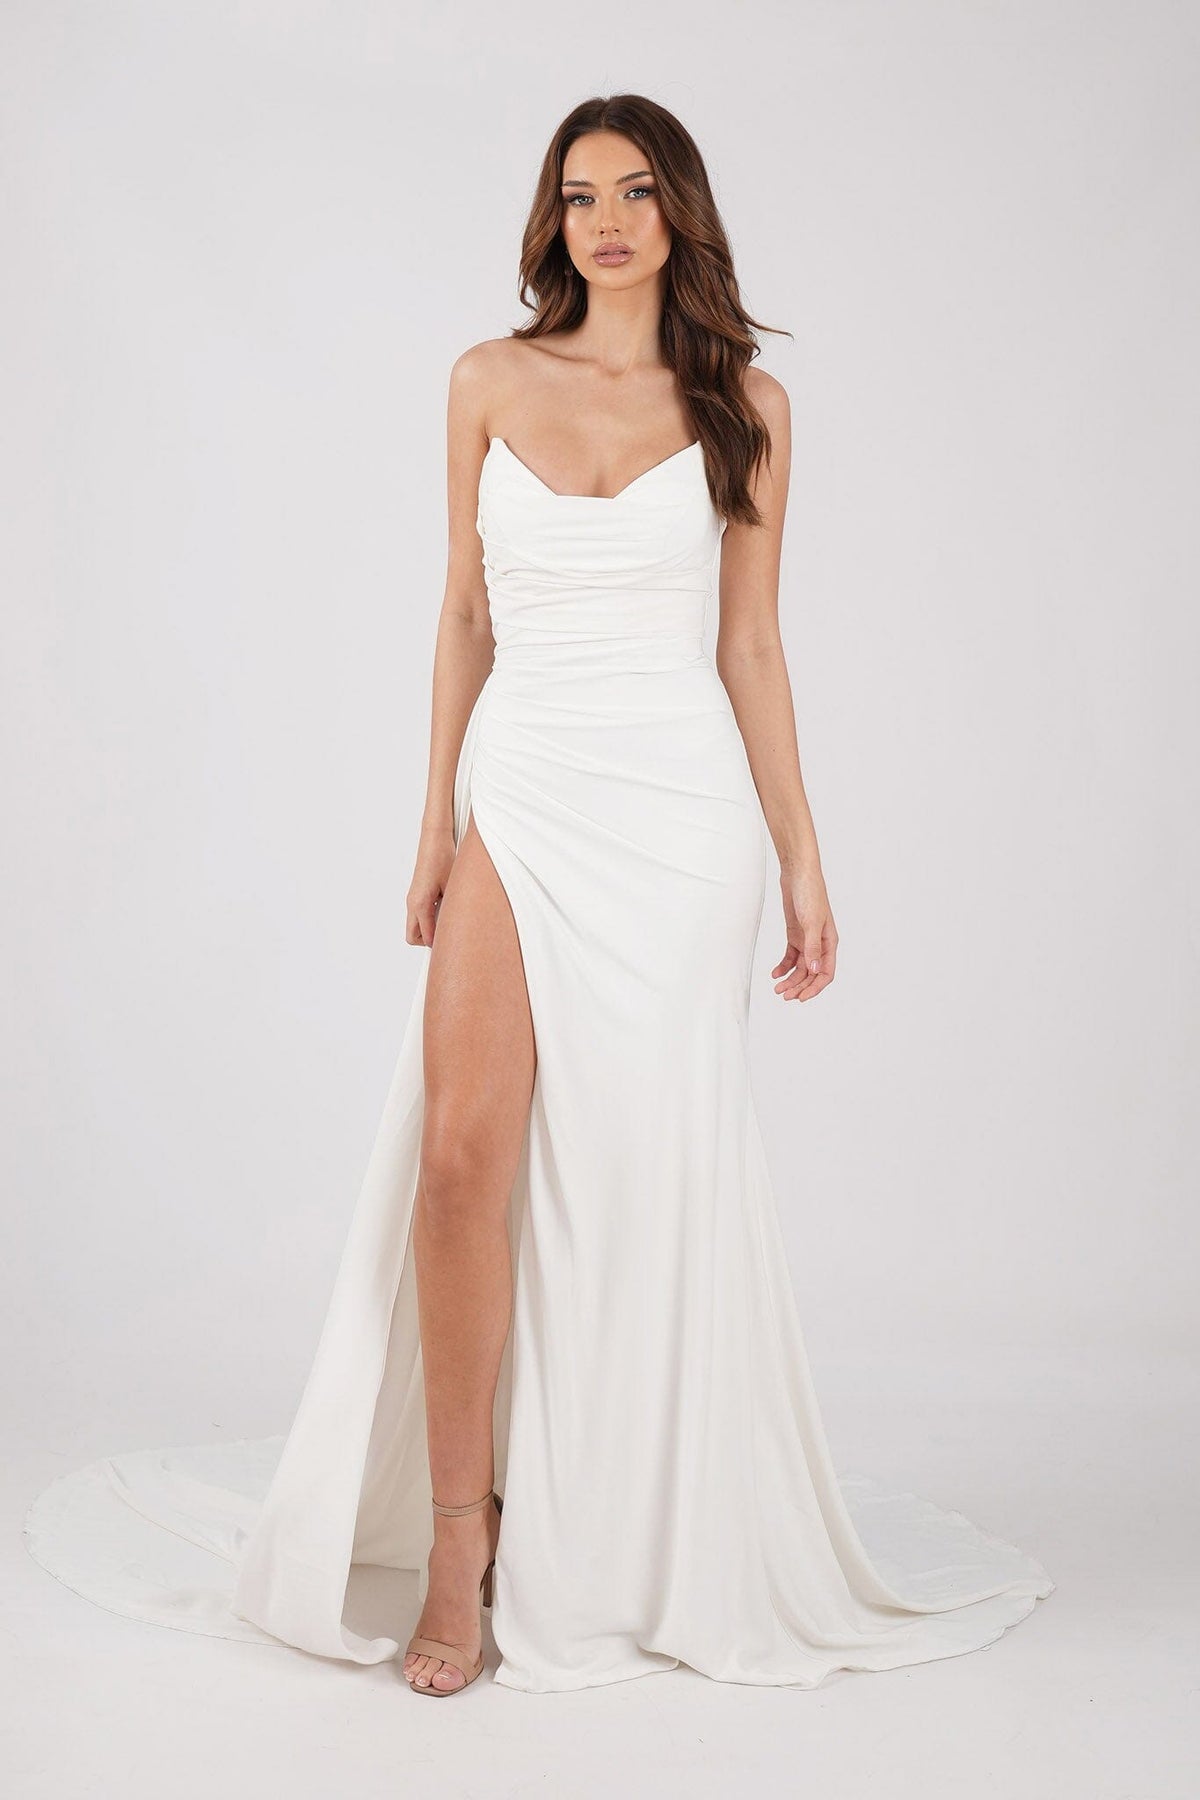 Ivory White Strapless Wedding Gown with Draped Detail at Bust and Waist, Thigh High Side Slit and Sweep Train